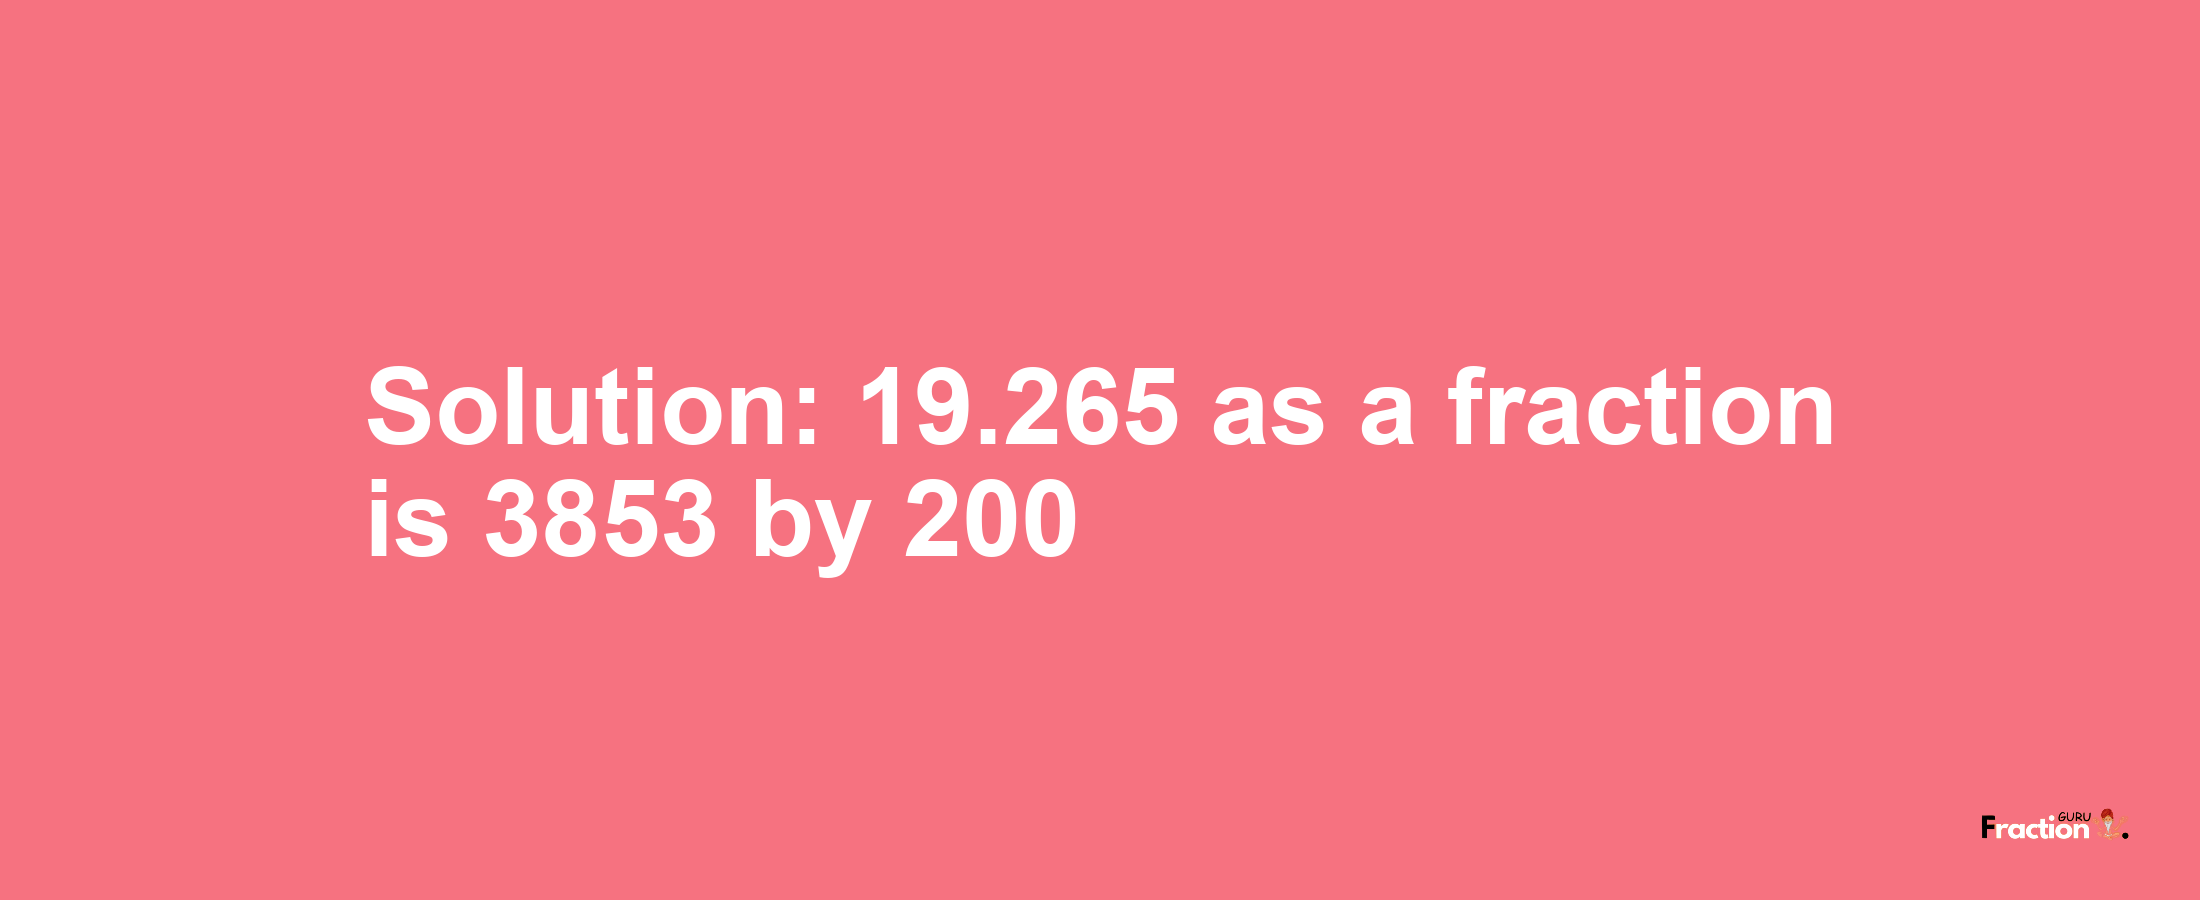 Solution:19.265 as a fraction is 3853/200